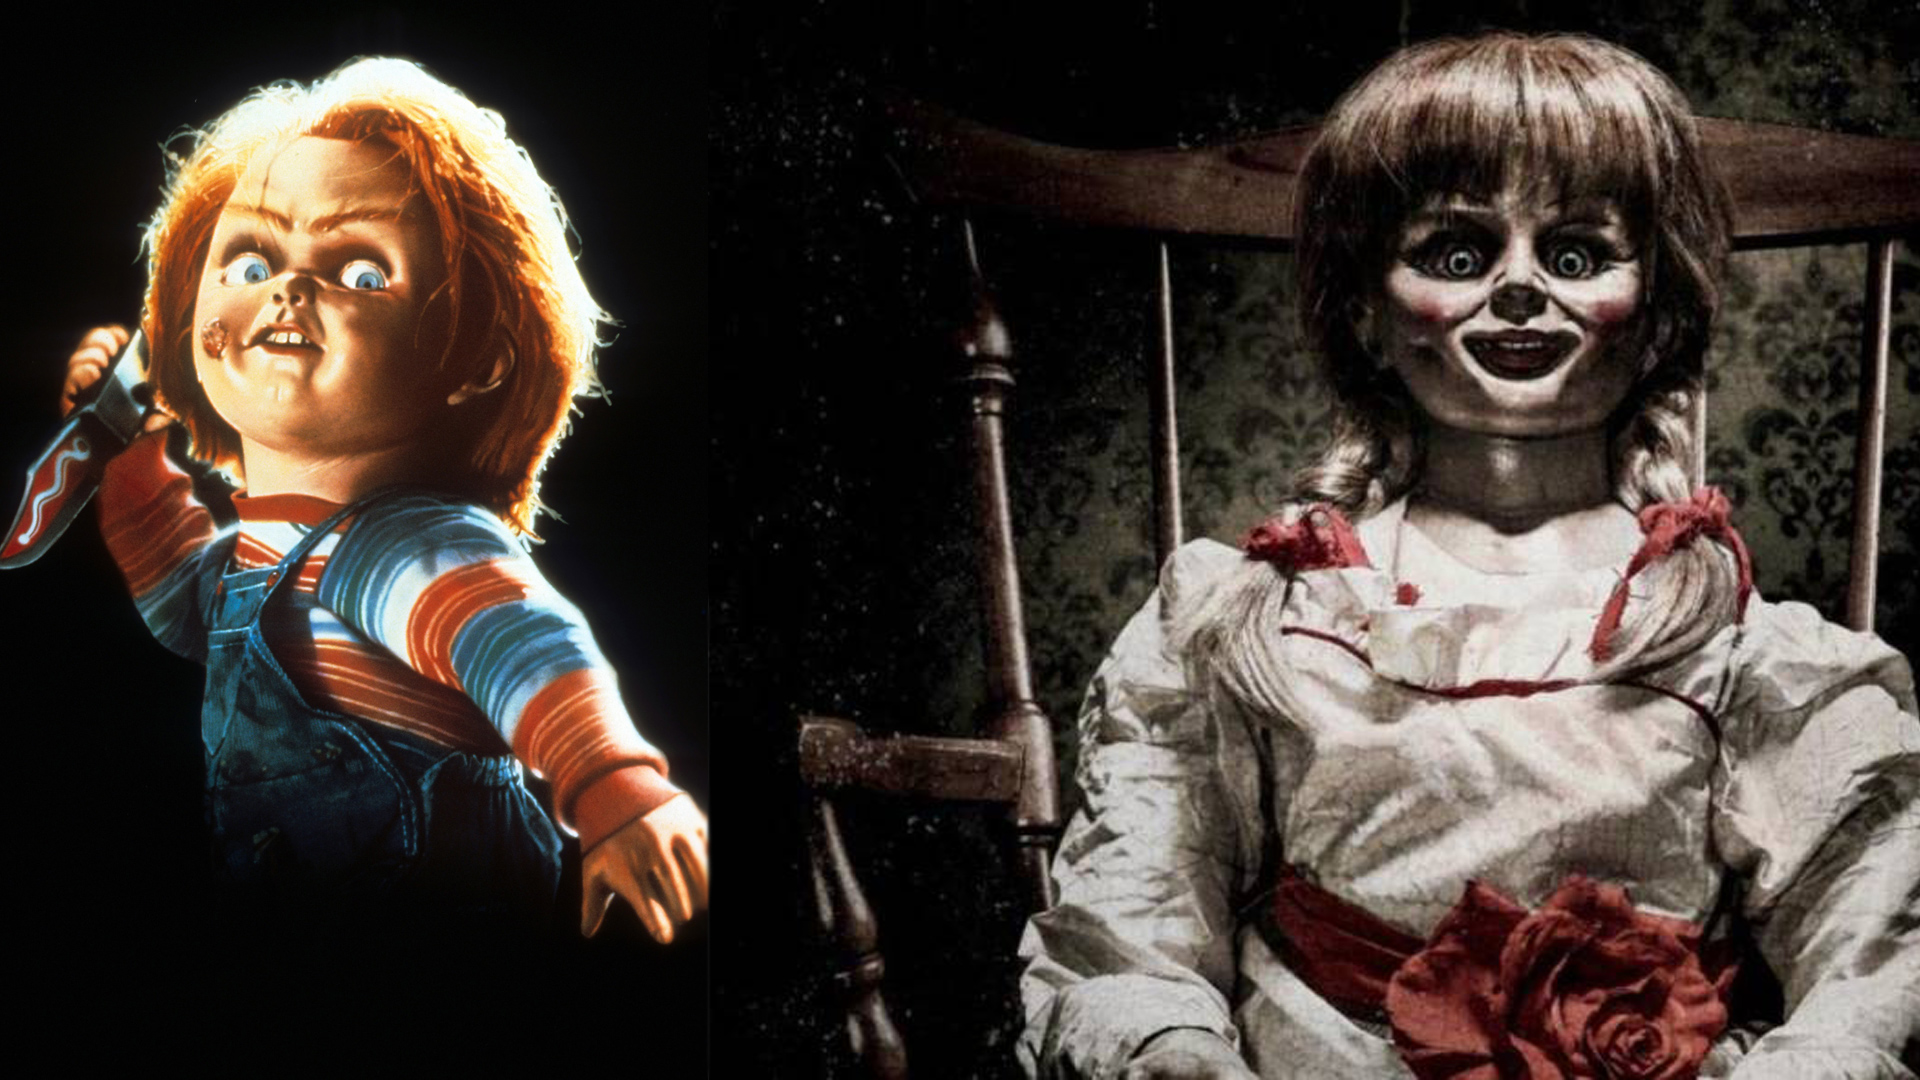 Annabelle Vs Chucky Which Creepy Doll Should You Fear The Most